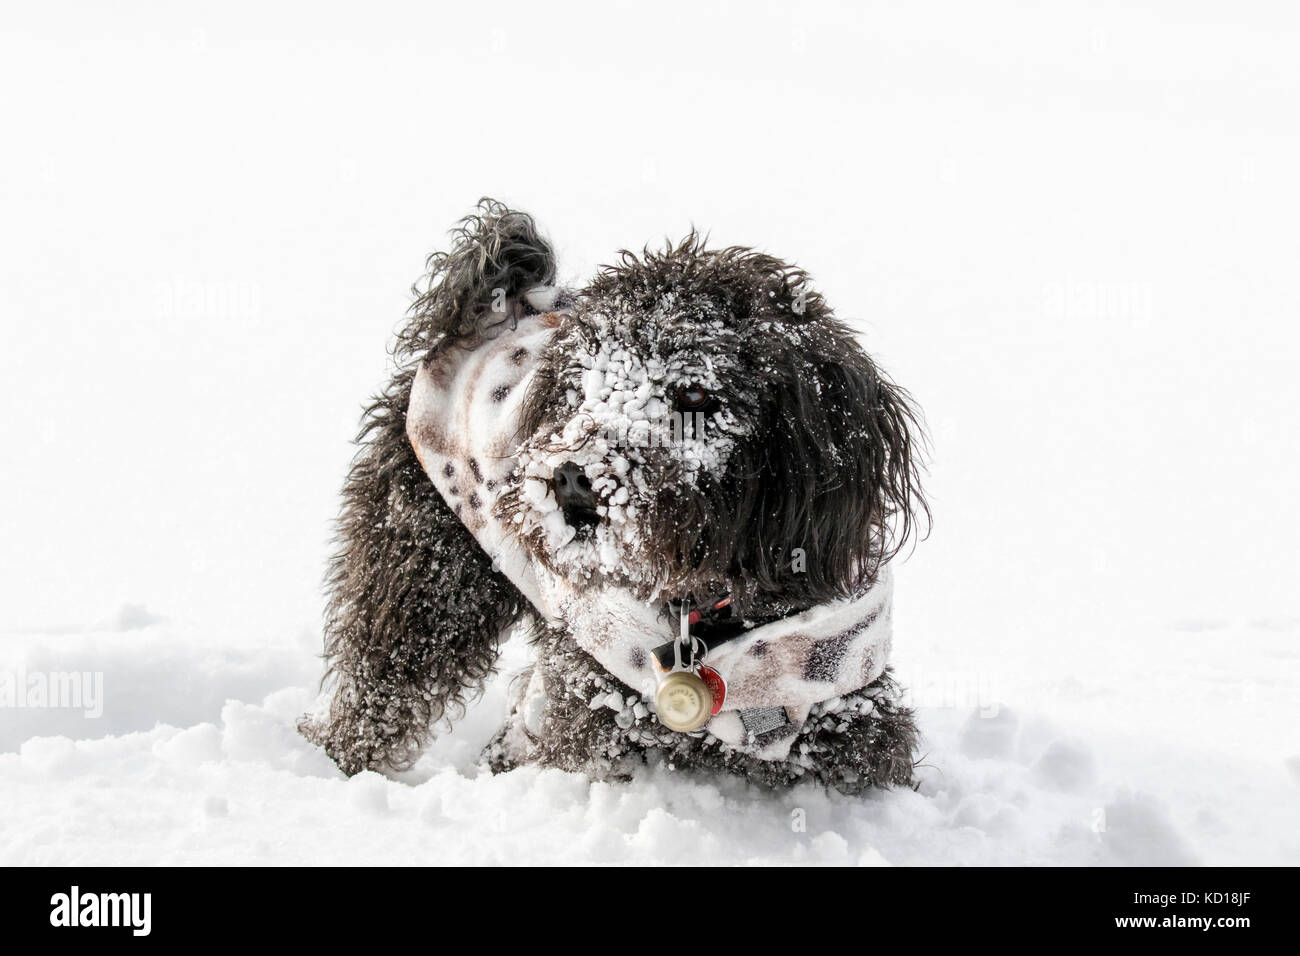 Molly, a black schnauzer-poodle cross breed (schnoodle) dog  playing in the snow Stock Photo